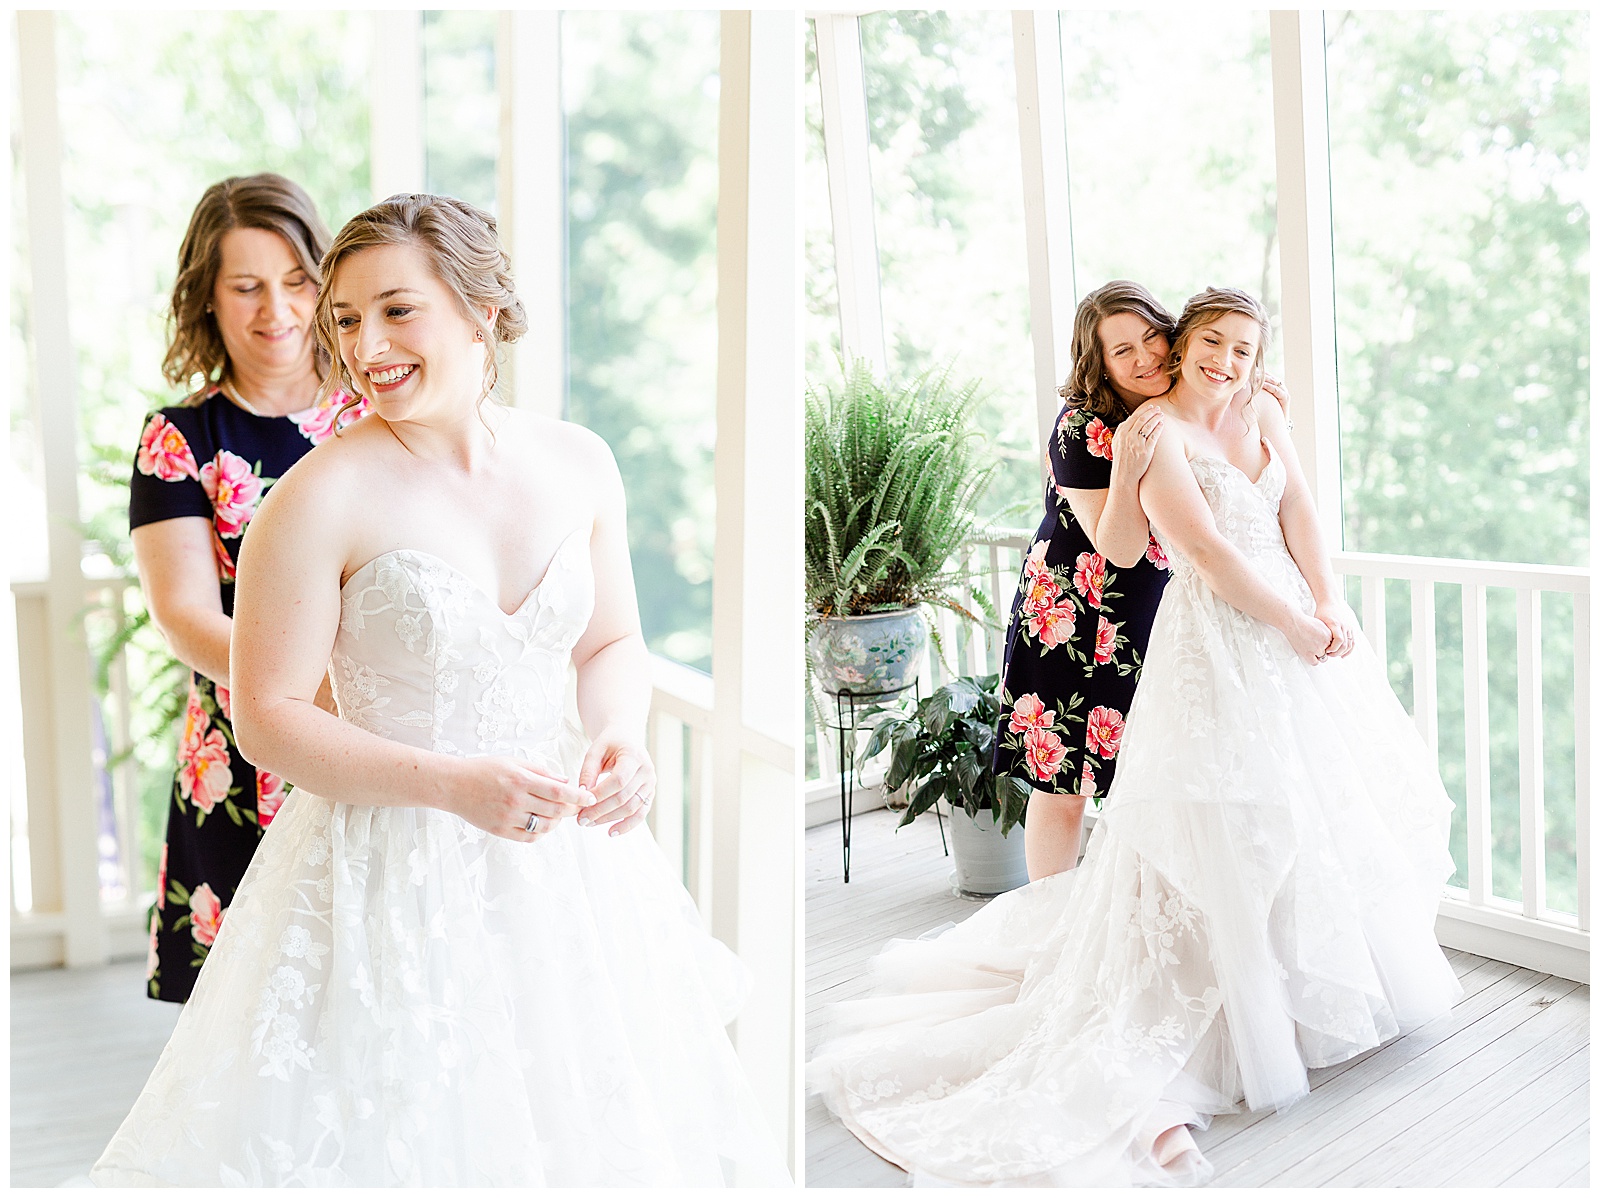 Beautiful Strapless Lace Wedding Dress from Outdoorsy Summer Wedding at North Carolina Lakehouse in the Mountains | check out the full wedding at KevynDixonPhoto.com